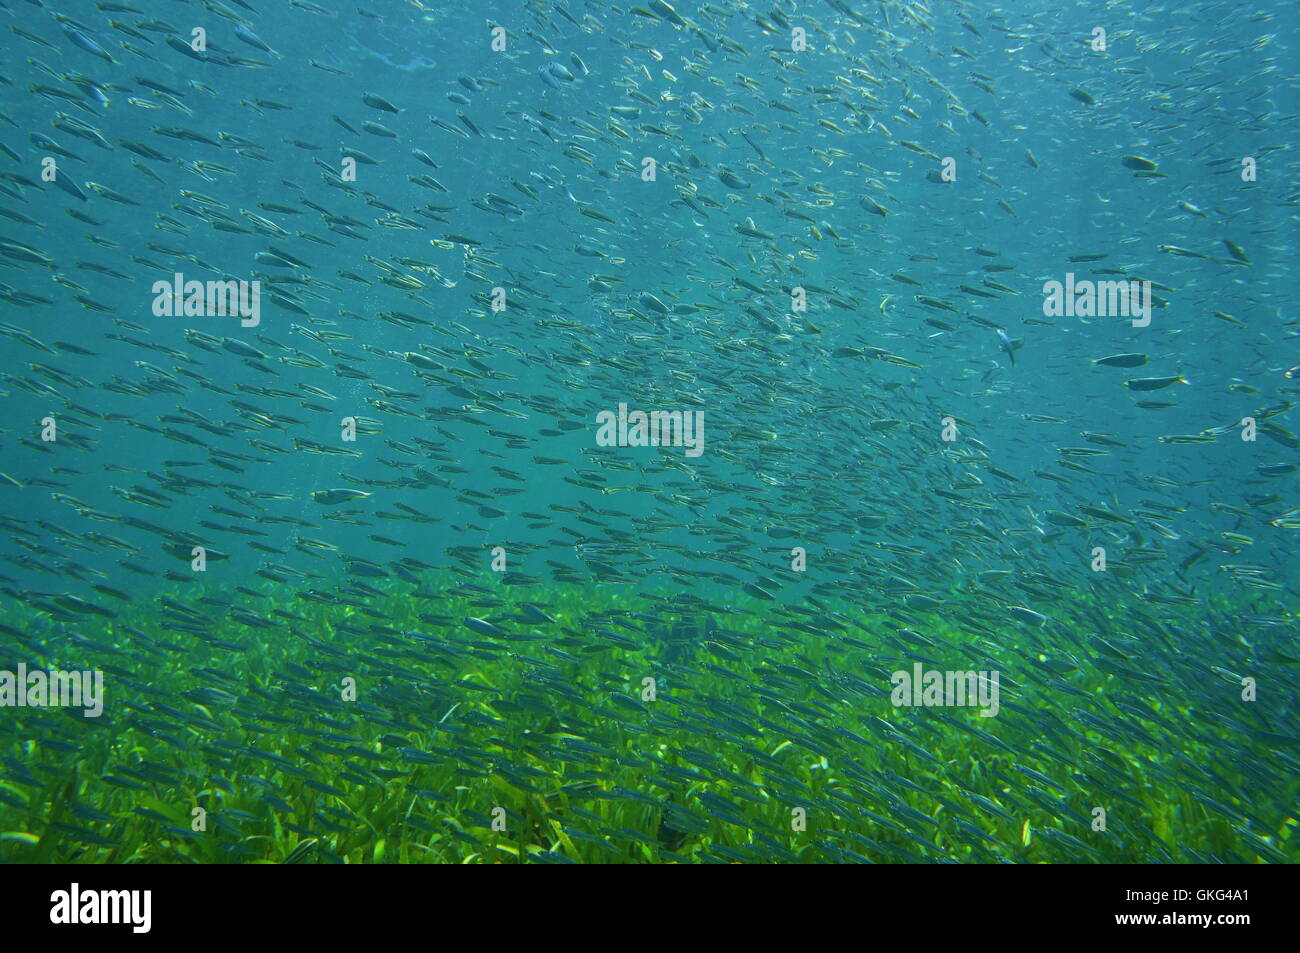 Juvenile fish school underwater sea over seabed with seagrass, Atlantic ocean, Florida Stock Photo